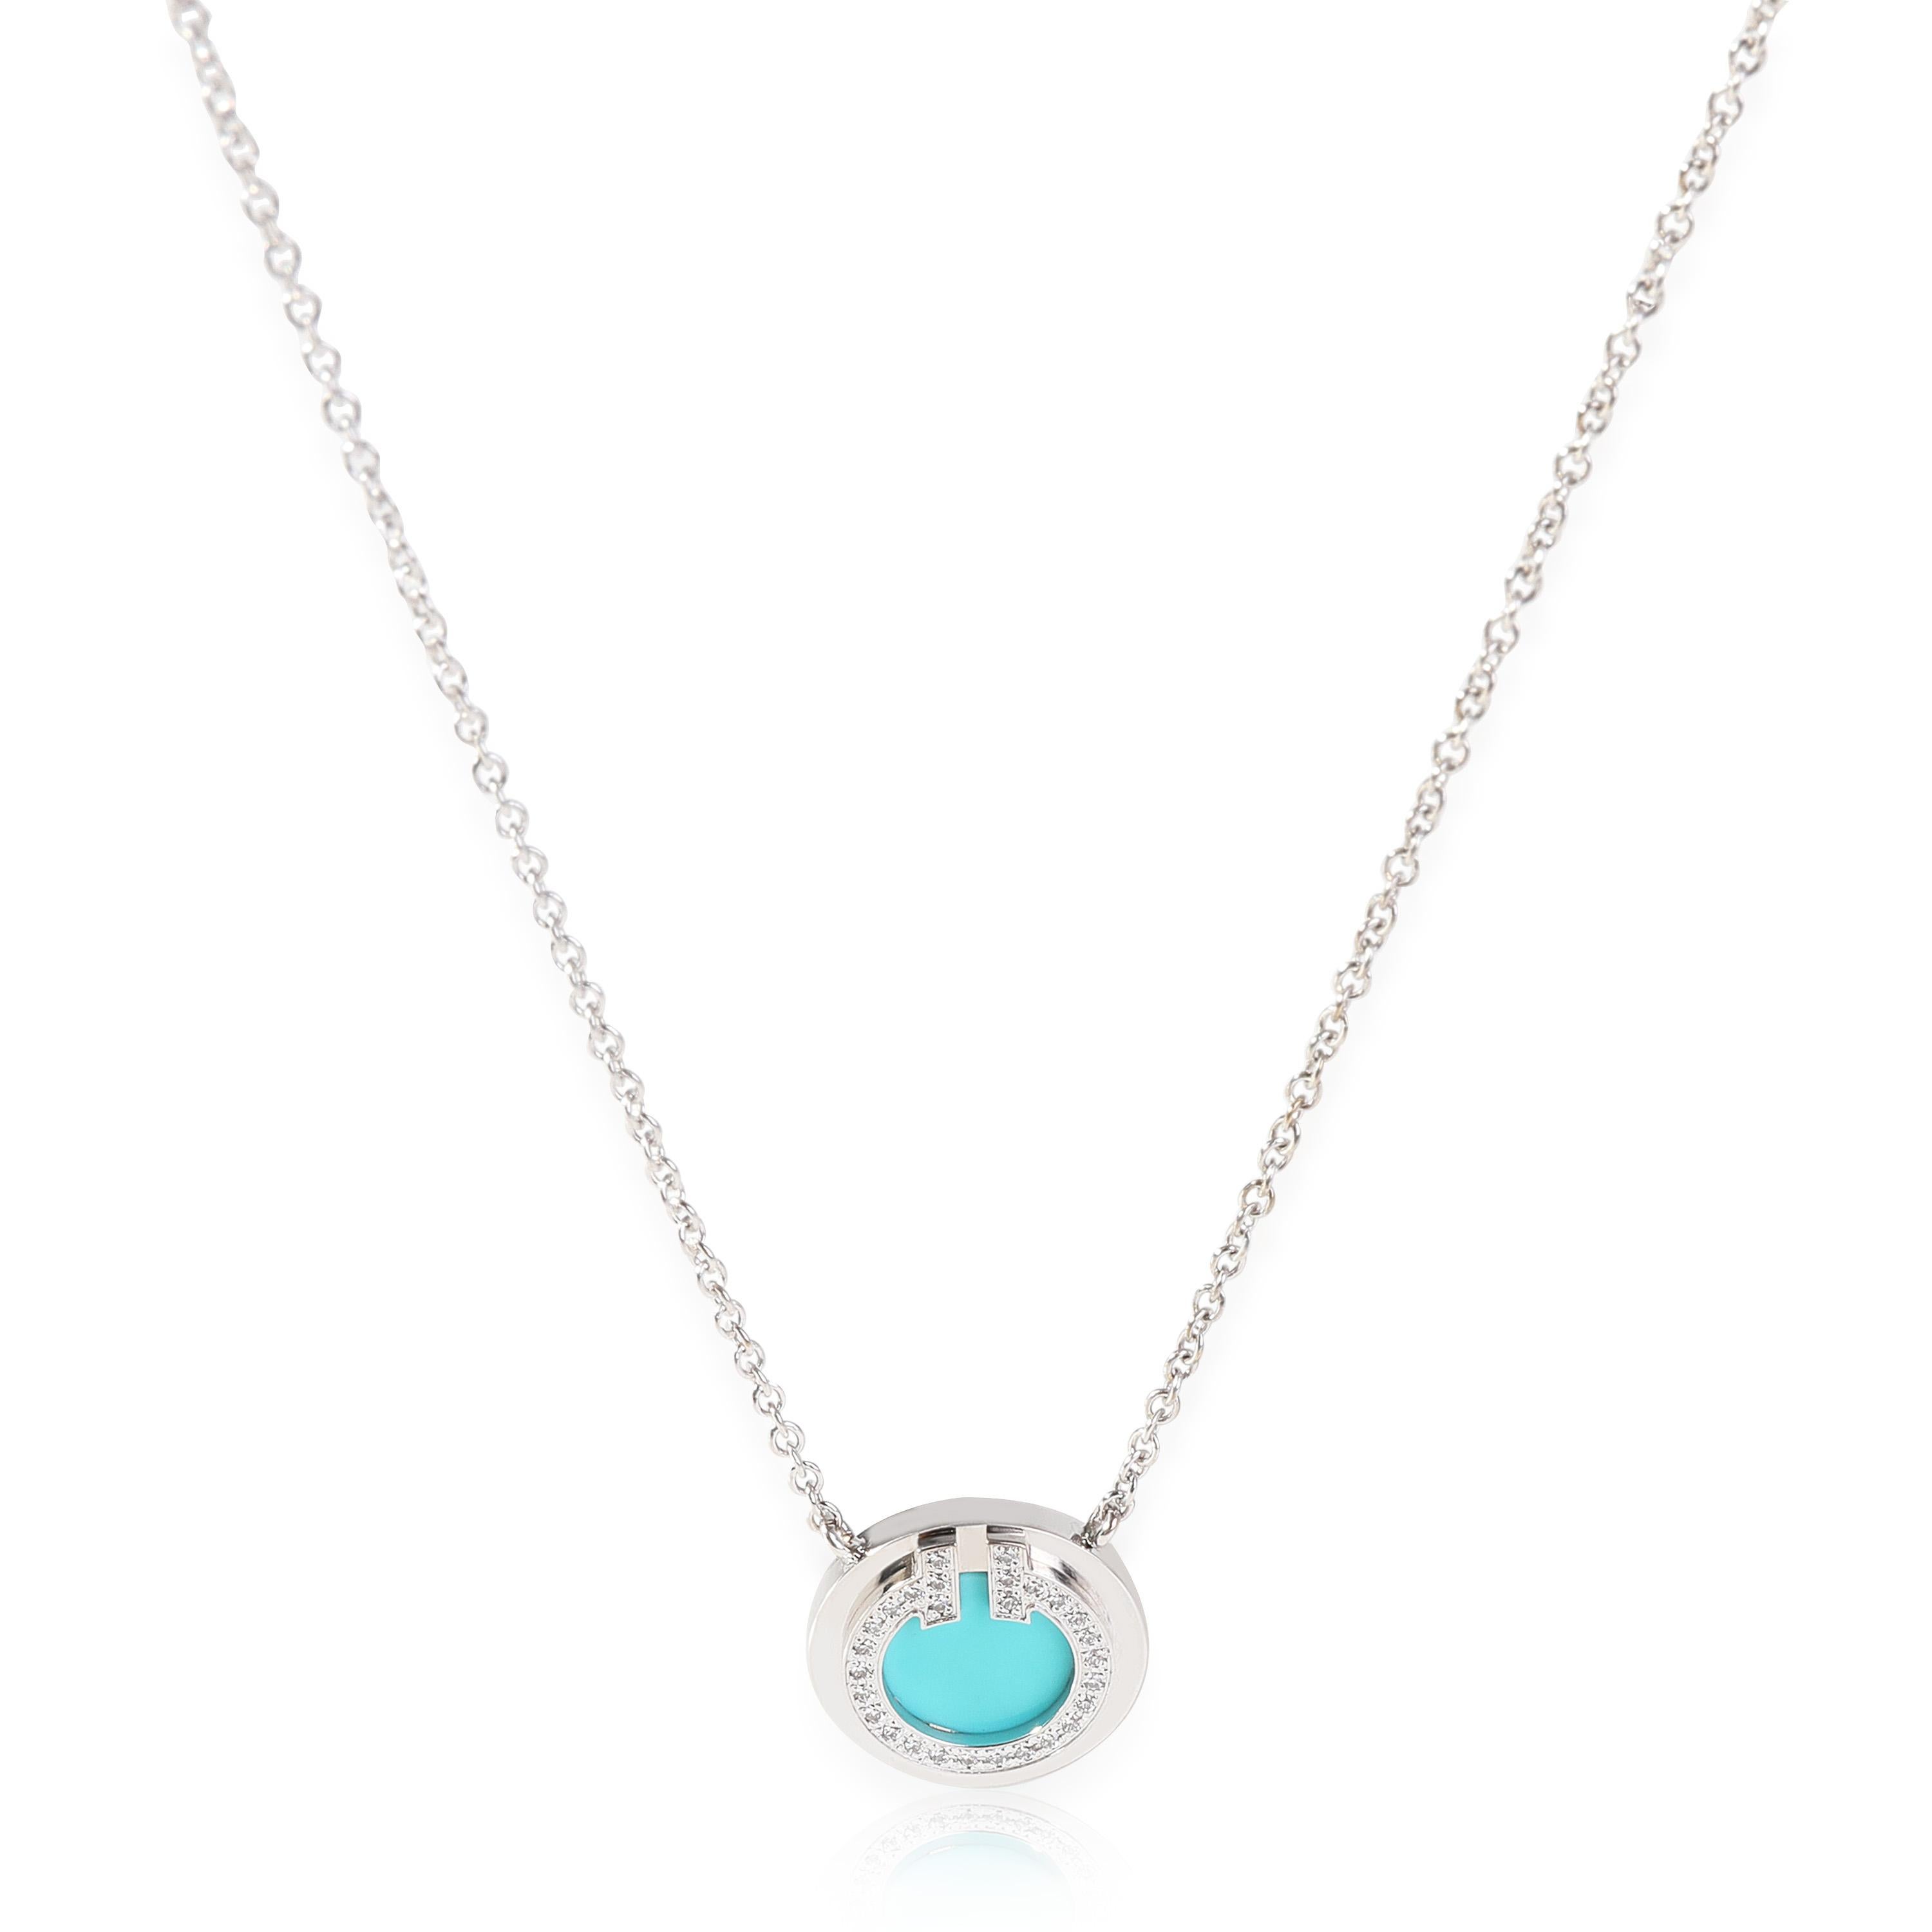 18K White Gold Tiffany & Co. Tiffany T Diamond And Turquoise Circle Pendant

PRIMARY DETAILS
SKU: 119497
Listing Title: 18K White Gold Tiffany & Co. Tiffany T Diamond And Turquoise Circle Pendant
Condition Description: Retails for 2600 USD. Chain